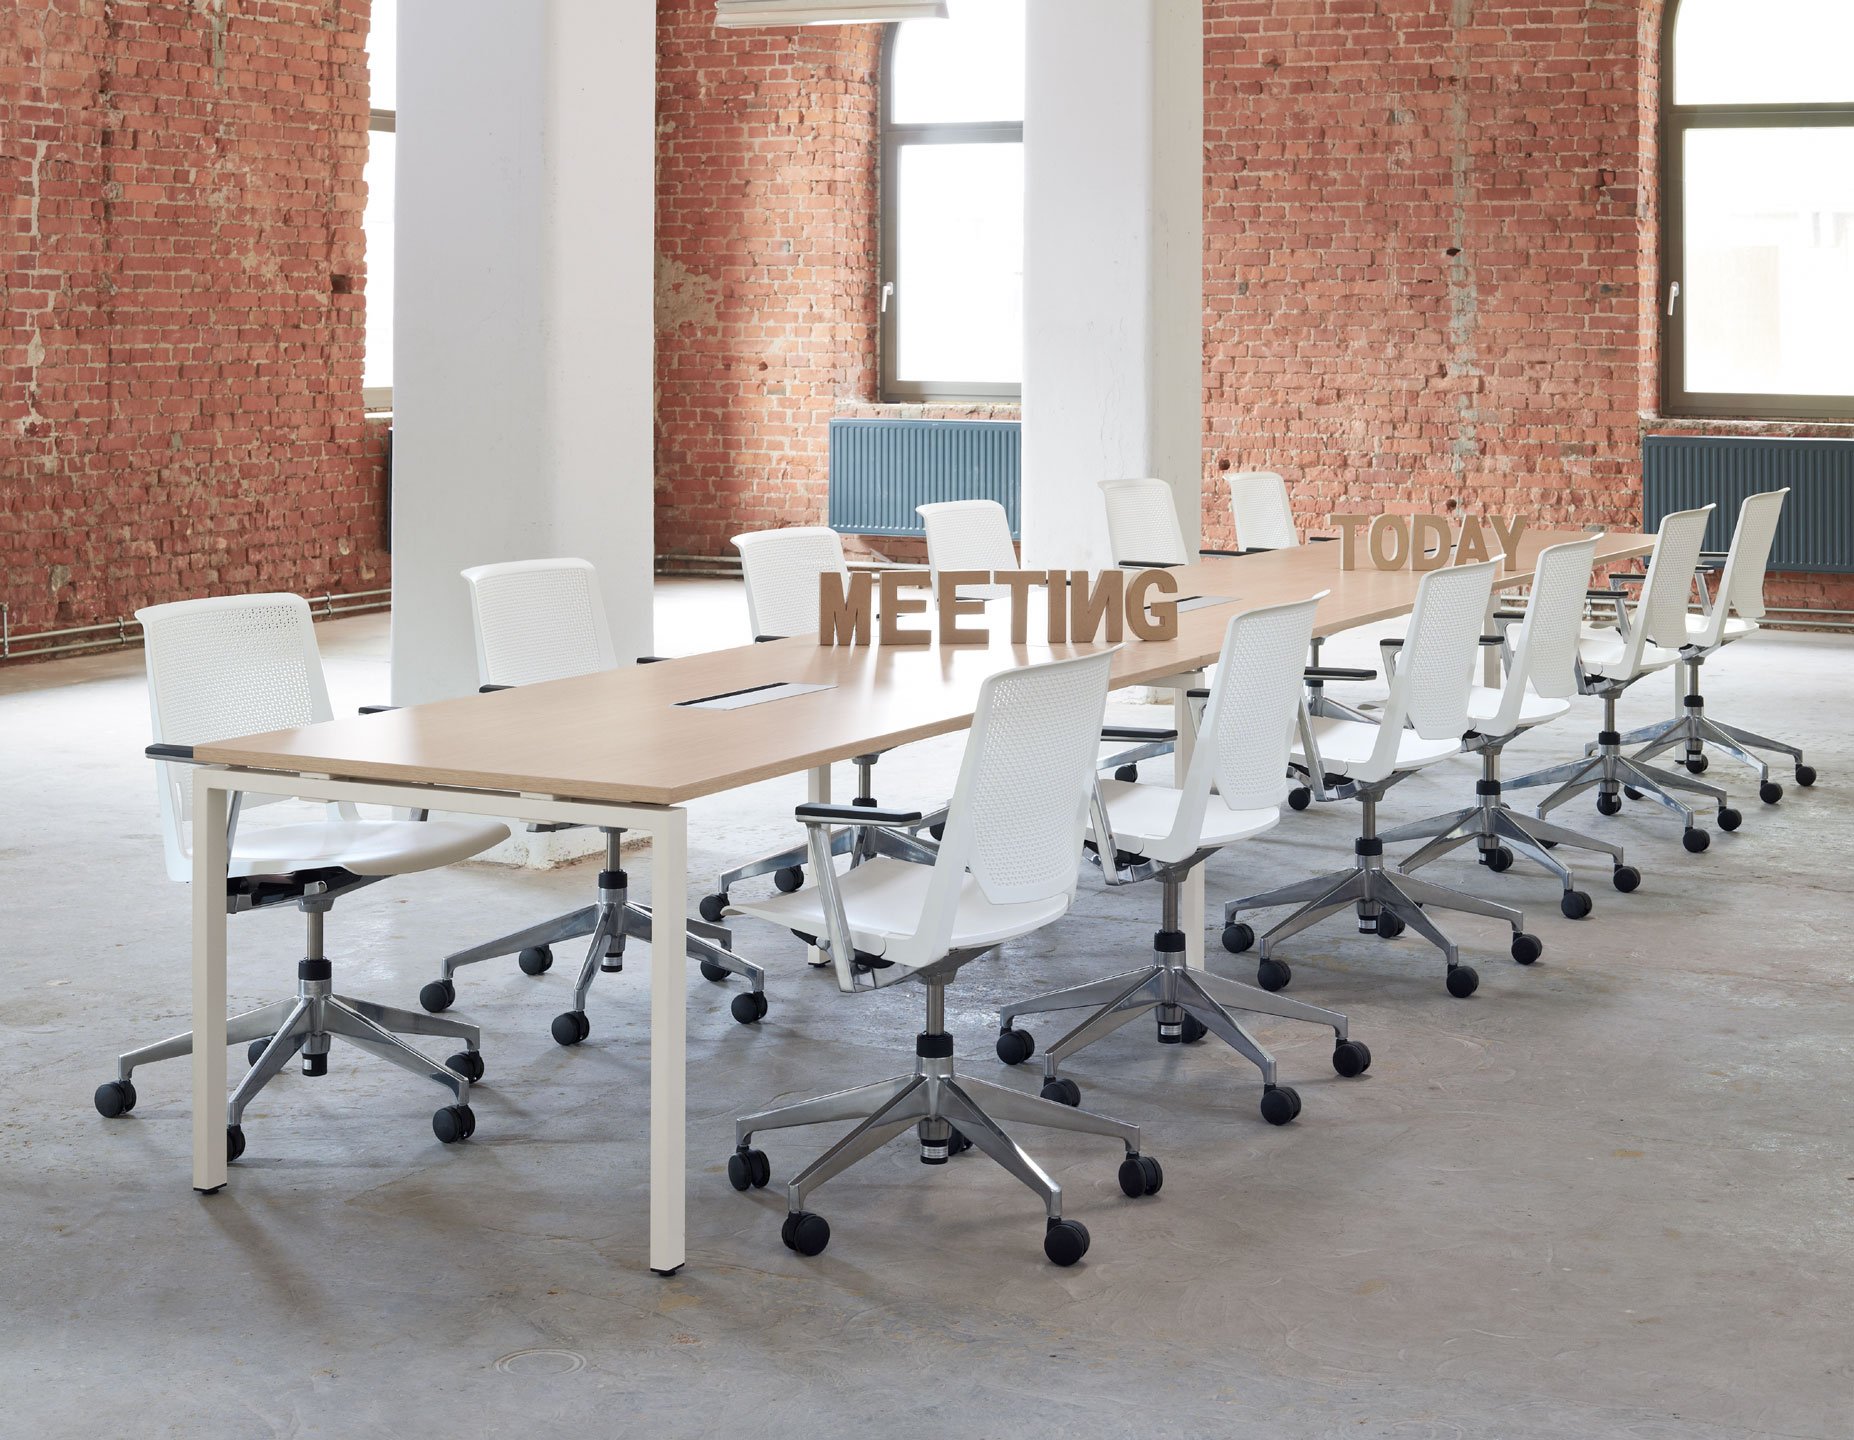 White Very Conference chairs around large conference table